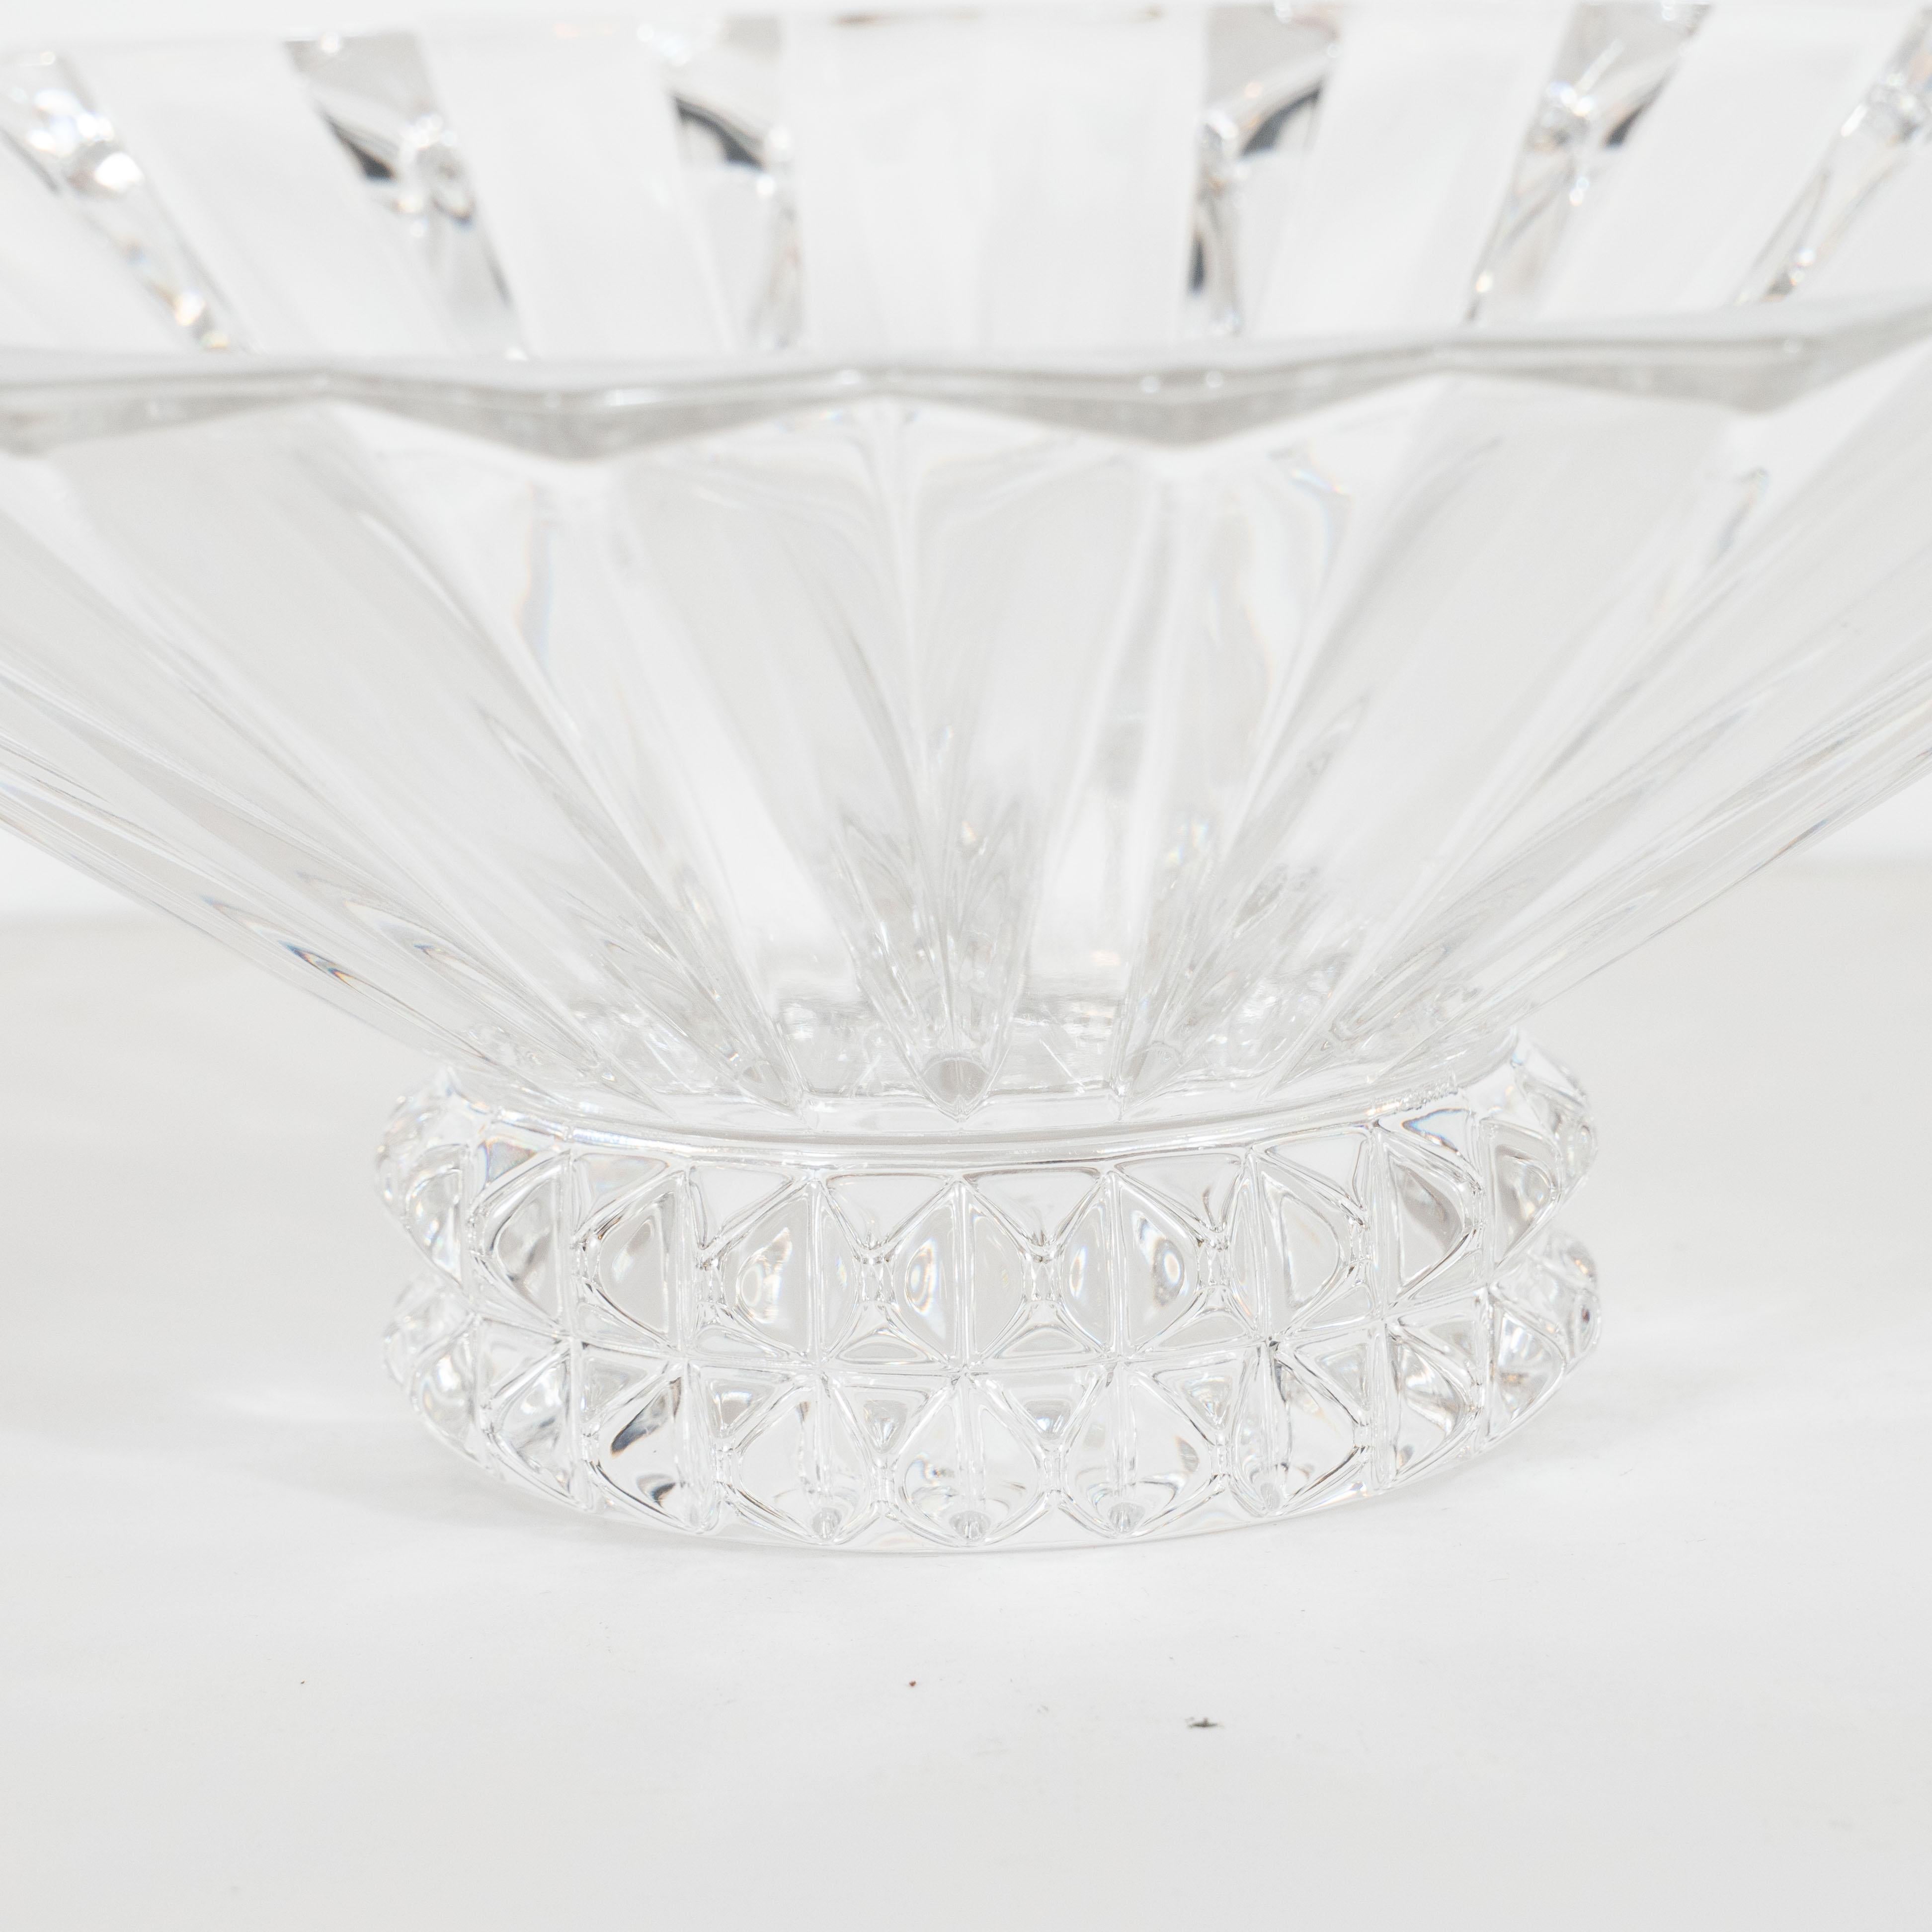 This elegant centerpiece bowl was realized by the illustrious 20th century design firm, Rosenthal, in Germany circa 1980. It features a circular form with a sunburst pattern in relief adorning its neck and a scalloped mouth offering an abundance of